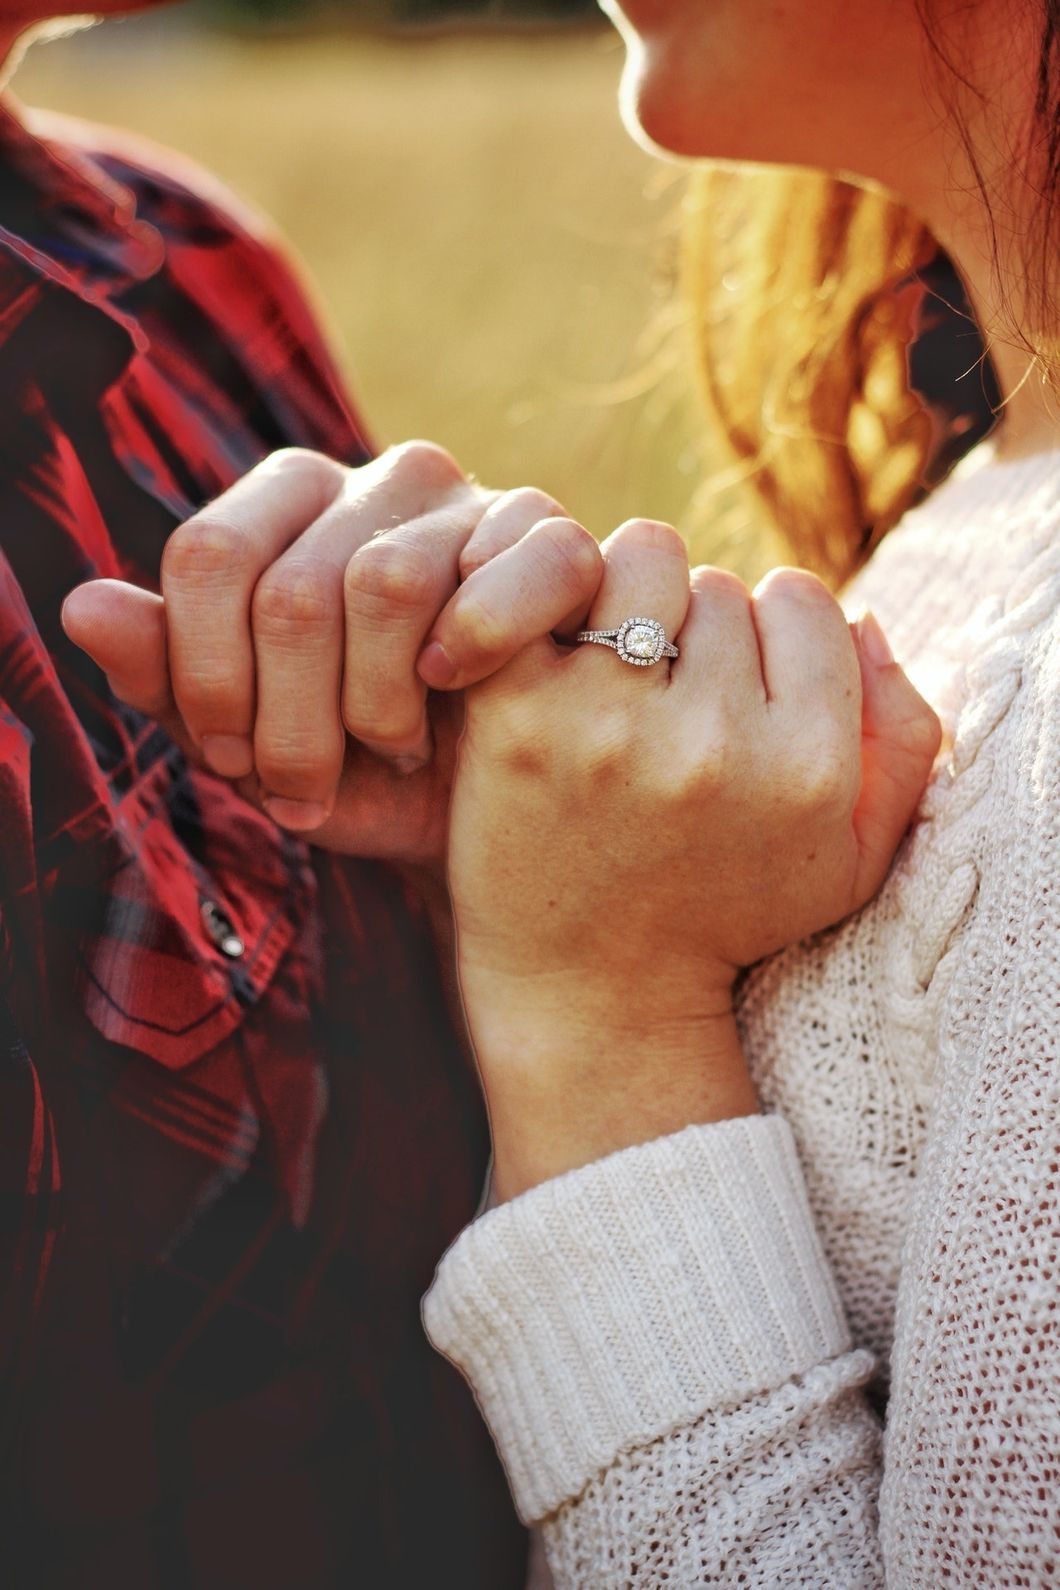 https://www.pexels.com/photo/man-and-woman-holding-hands-1483740/